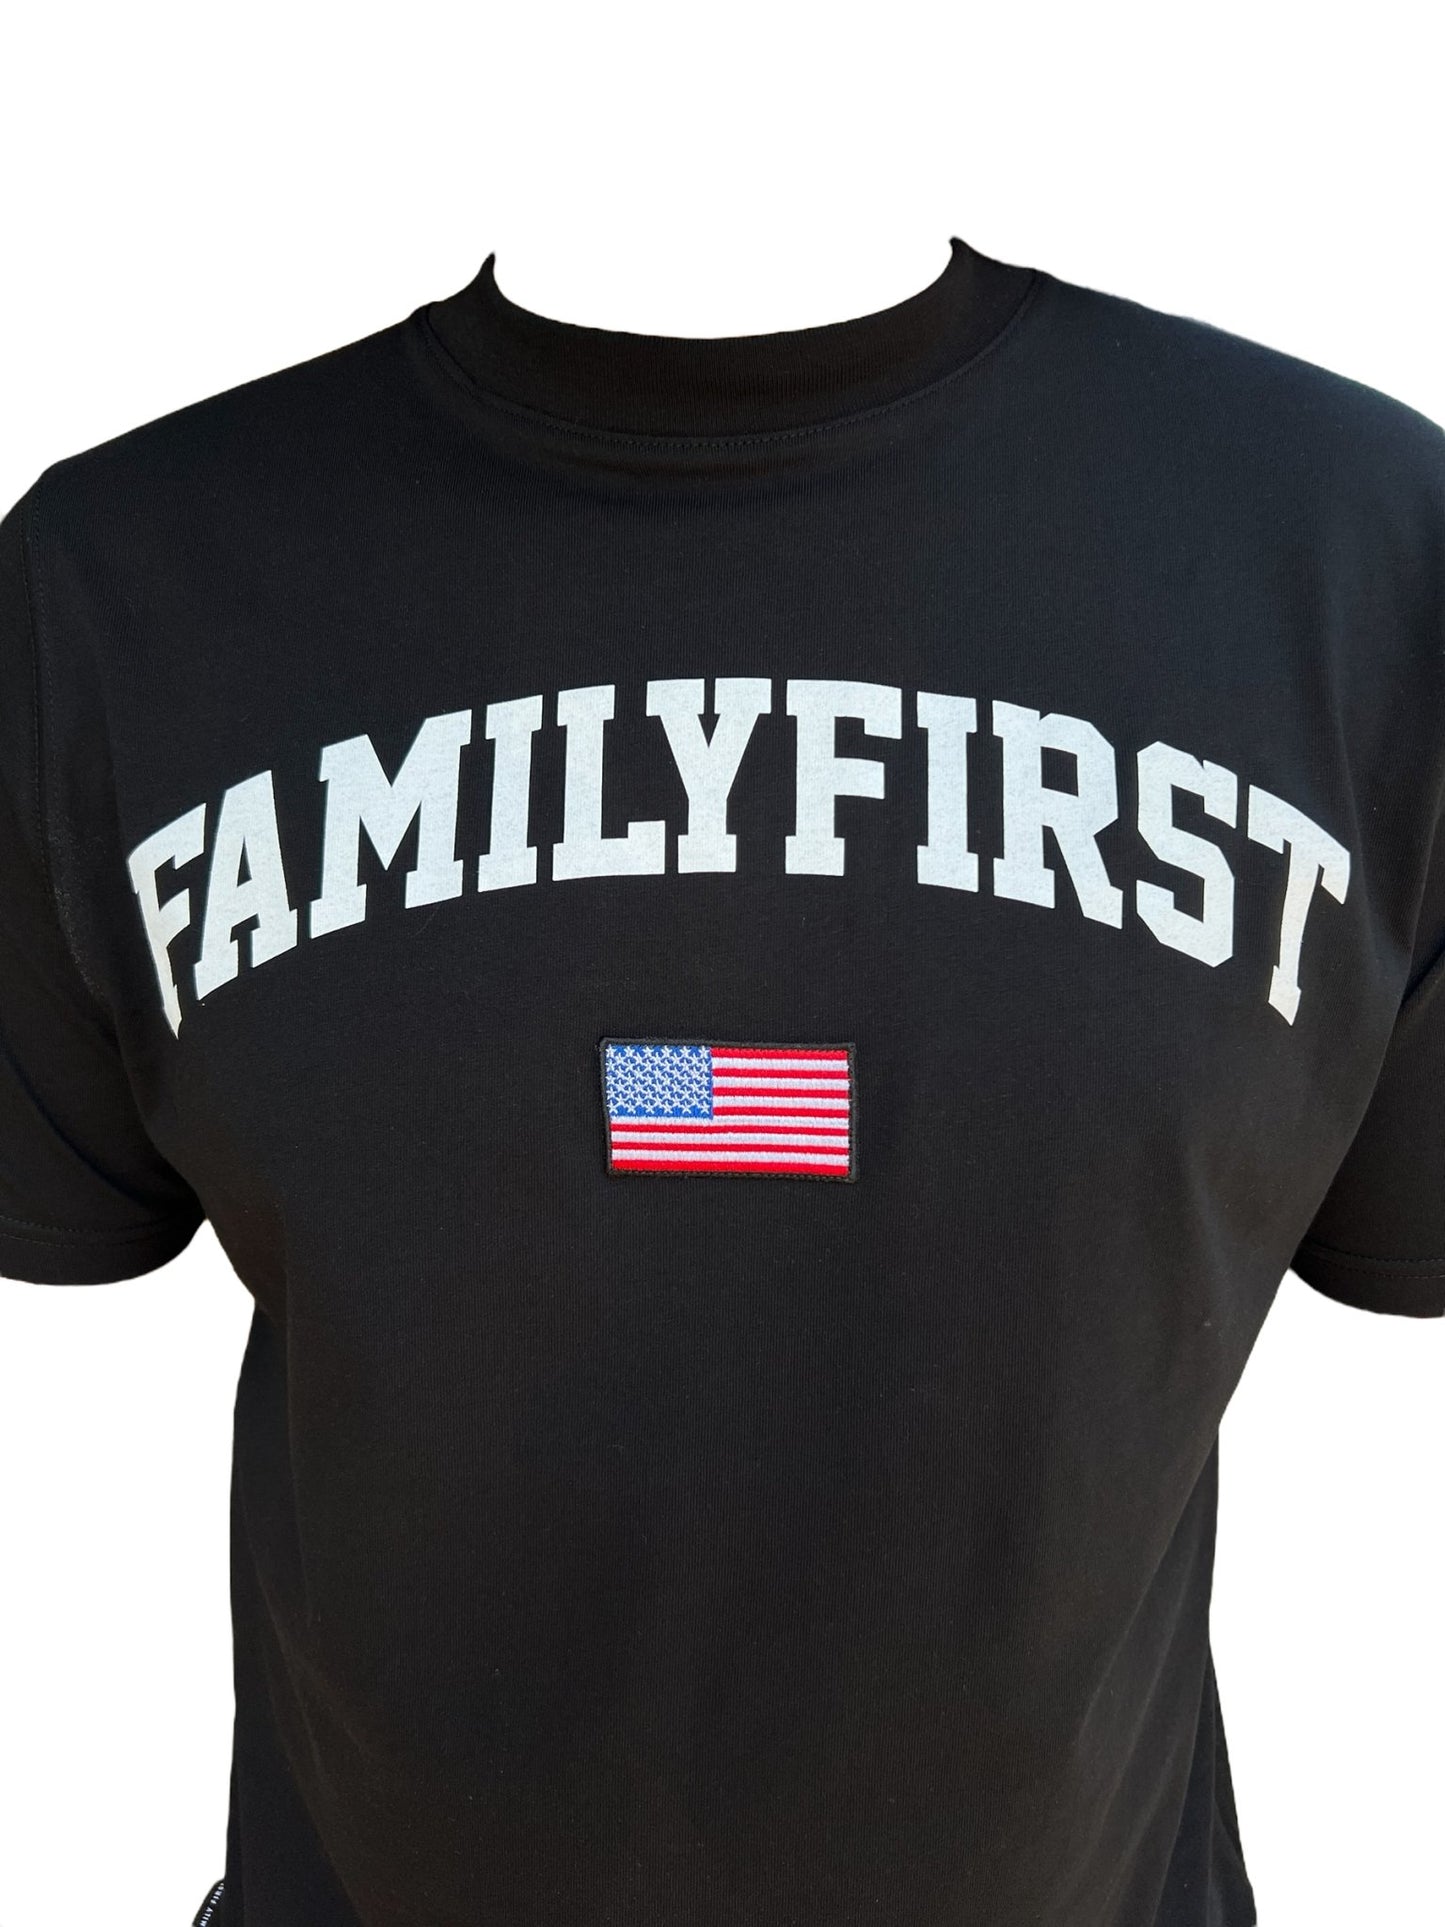 FAMILY FIRST TS2416 T-SHIRT COLLEGE BLACK